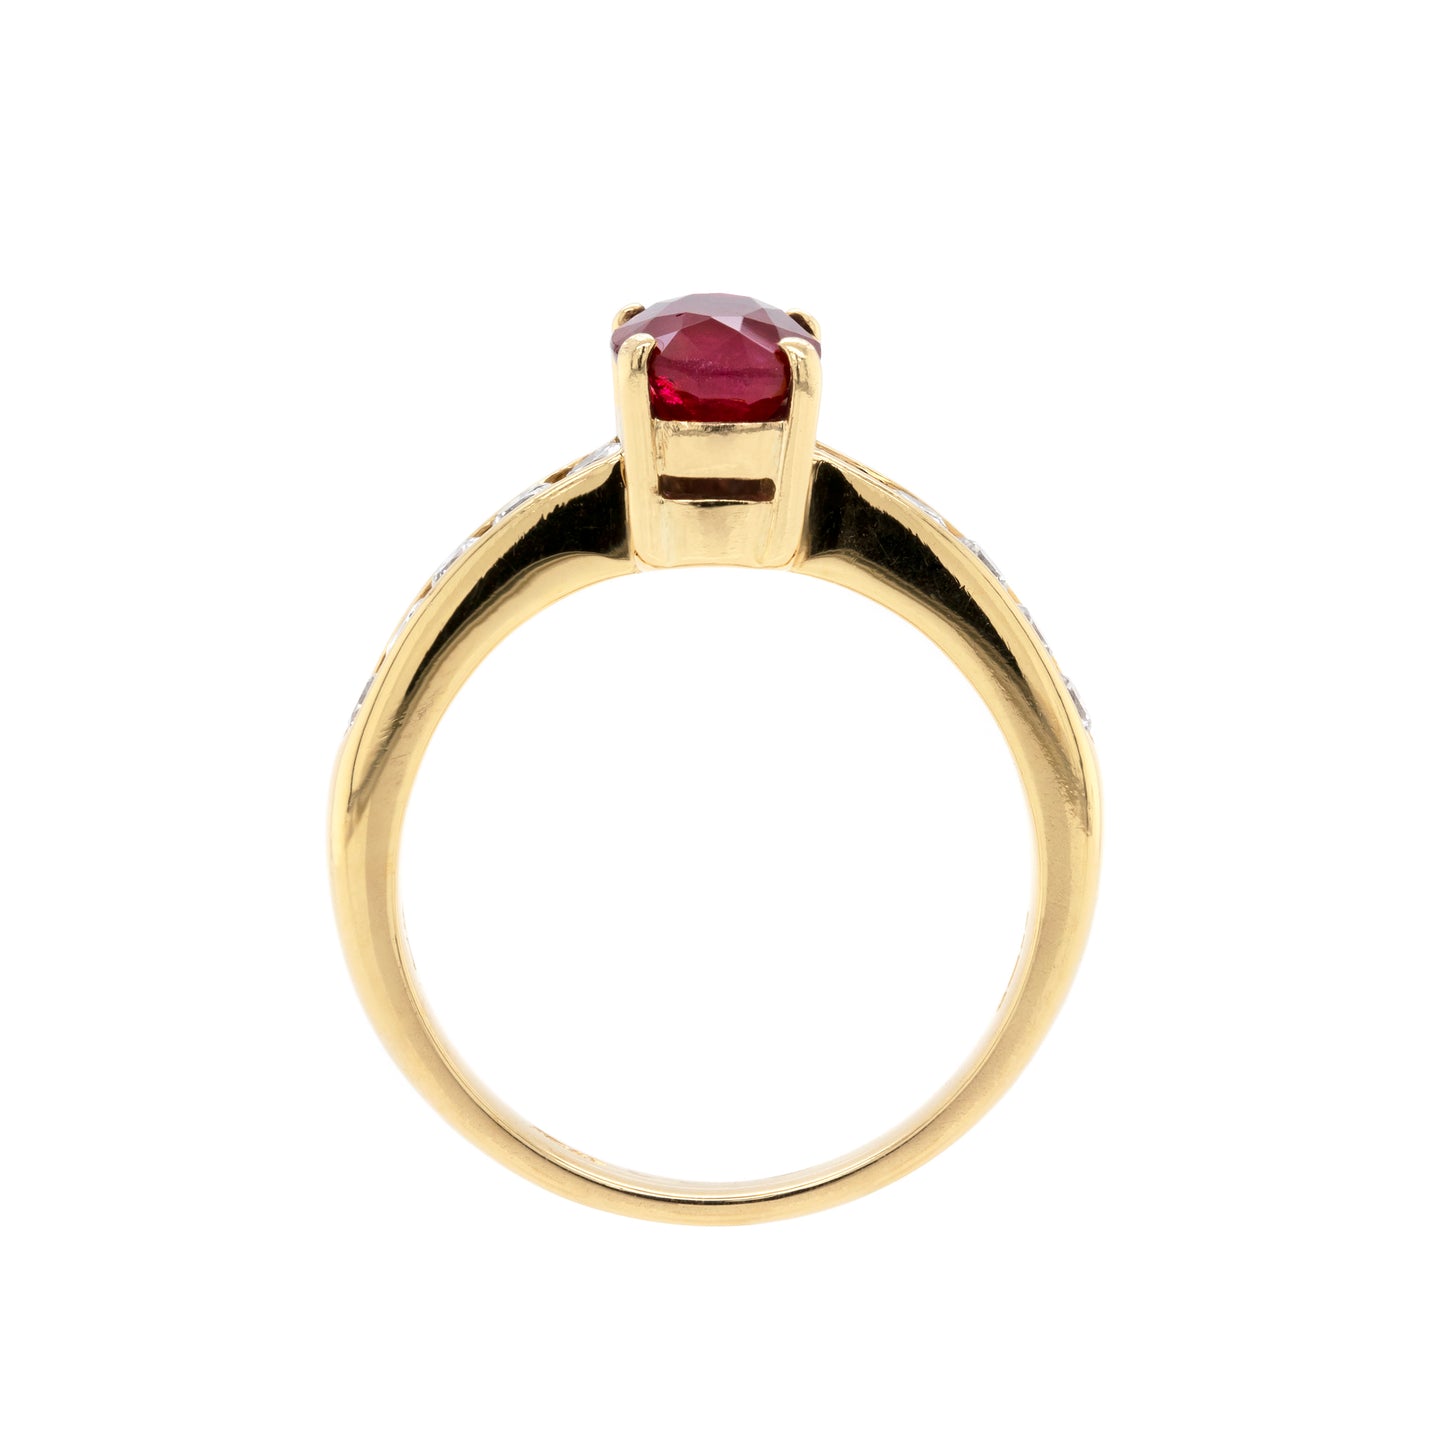 2.15 Carat Ruby and Diamond 18 Carat Yellow Gold Engagement Ring